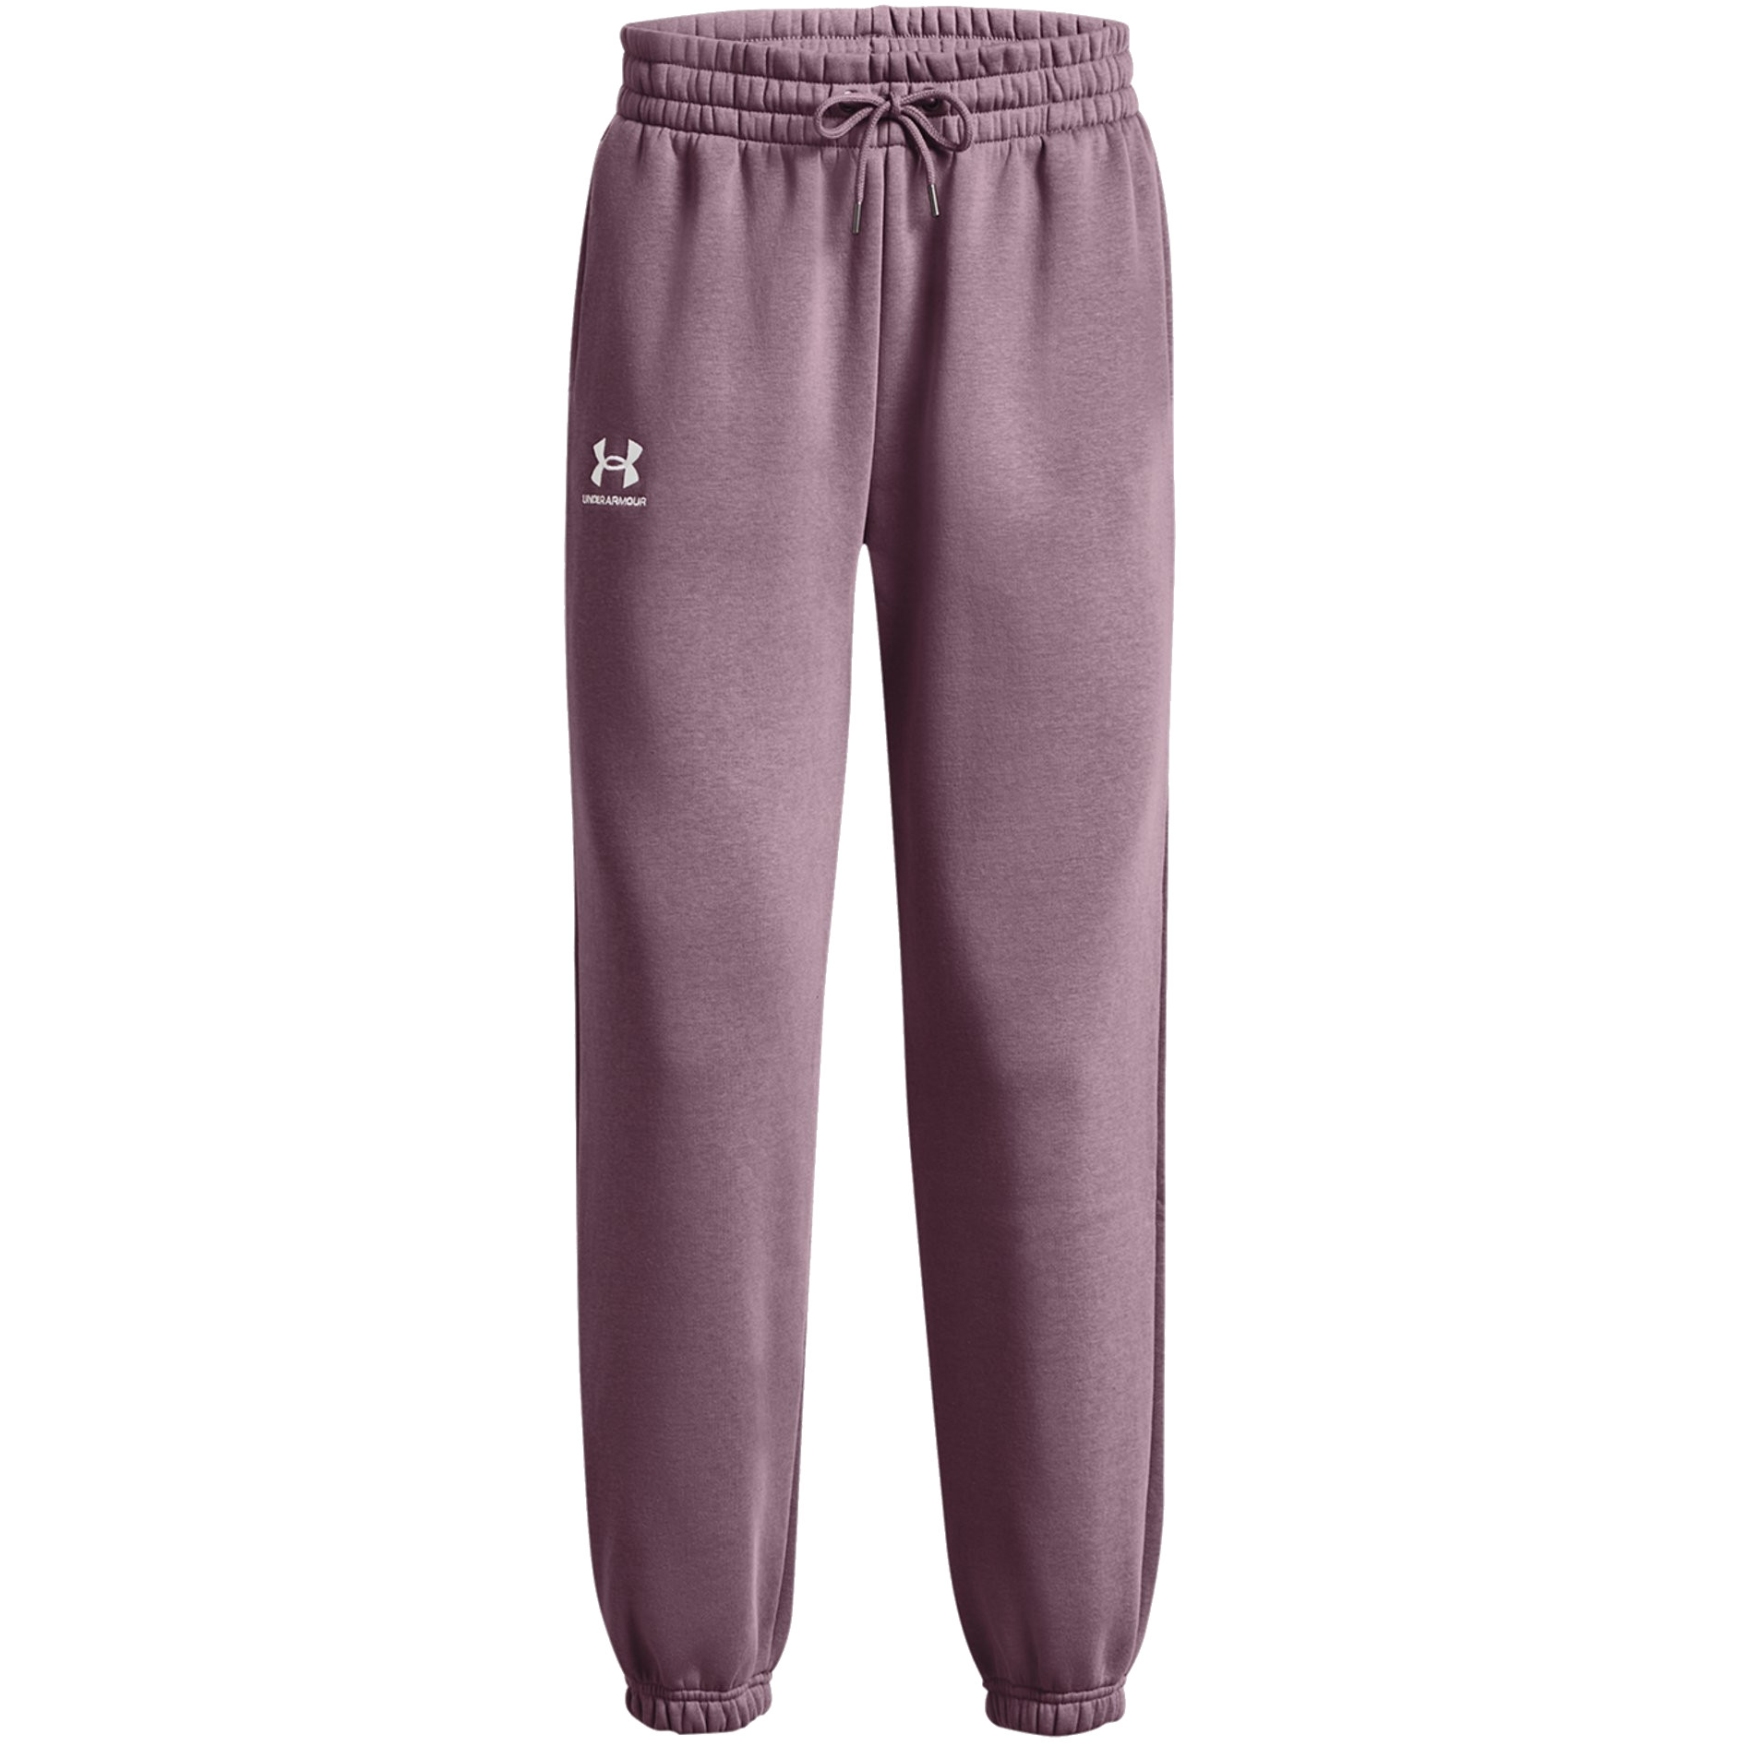 UNDER ARMOUR Women's UA Meridian Joggers NWT Club Purple SIZE: LARGE